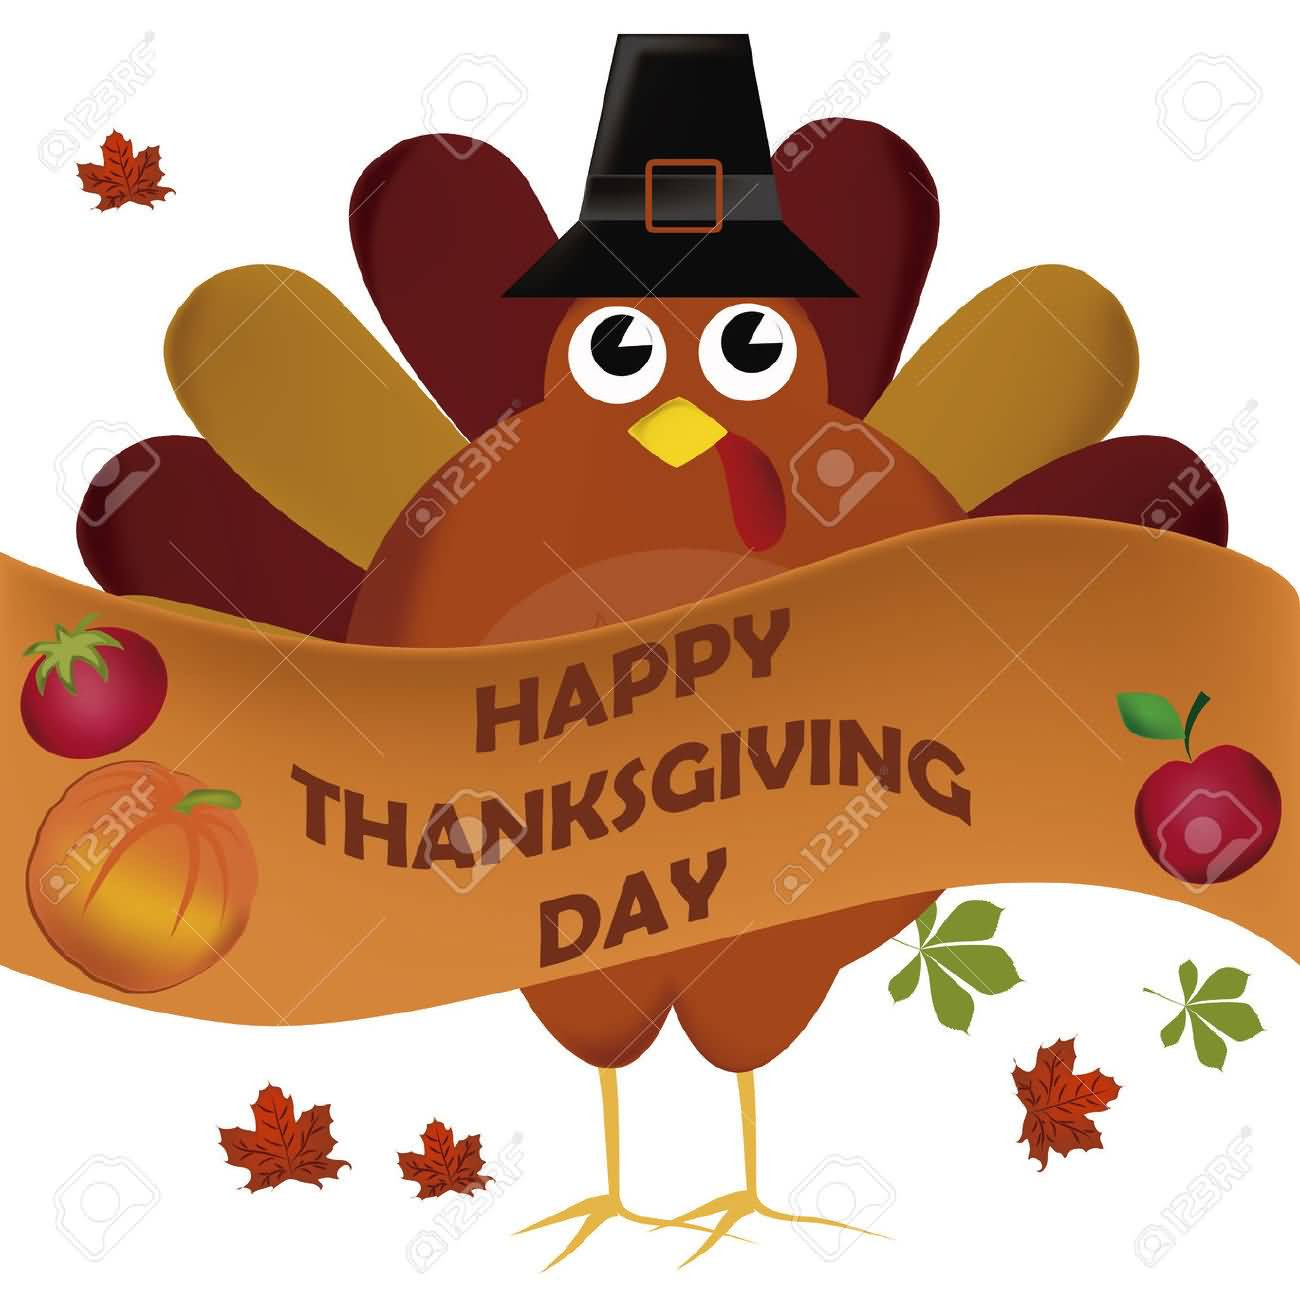 Happy Thanksgiving Turkey
 50 Best And s Thanksgiving Day